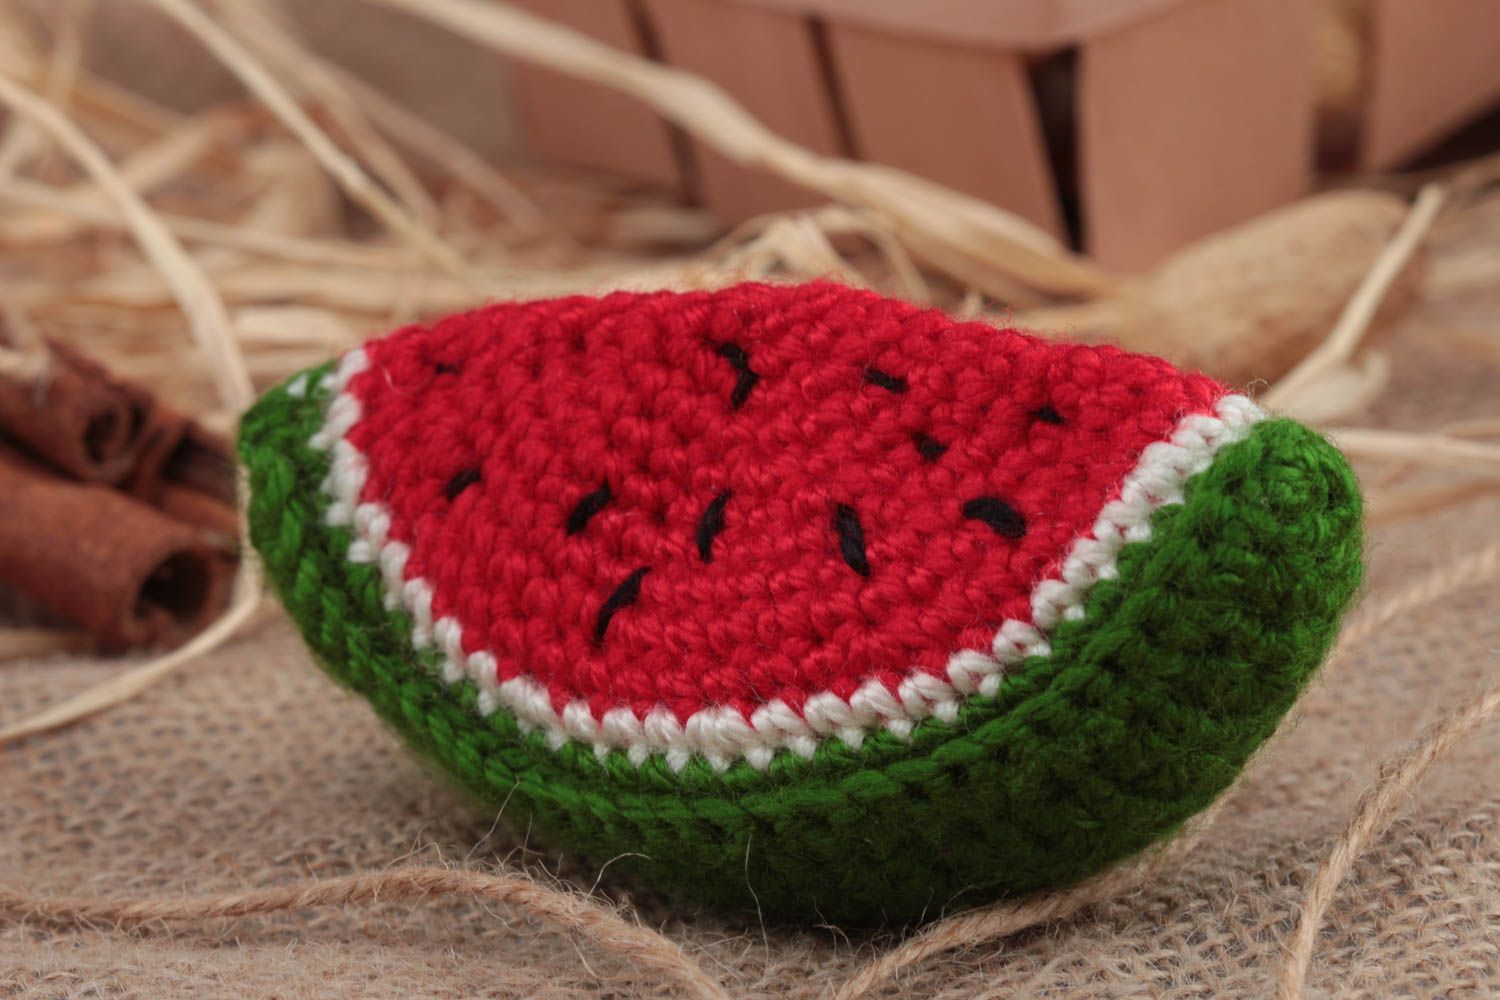 Handmade small crochet soft toy water melon slice for kids and interior decor photo 1